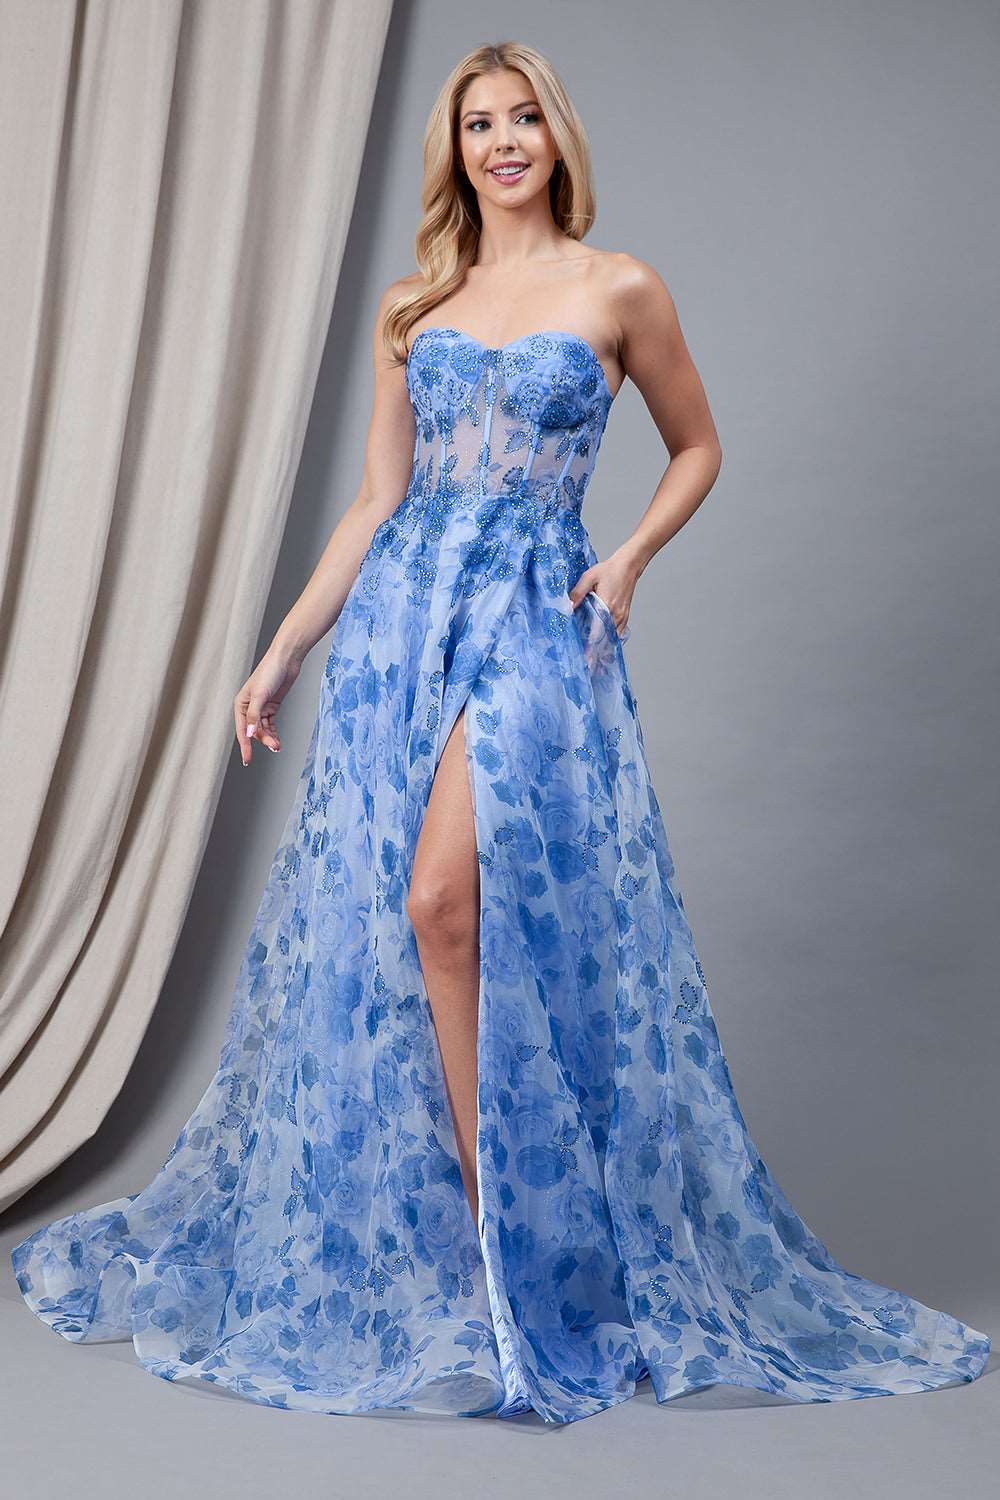 AC 2106 - Strapless A-Line Organza Print Prom Gown with Boned